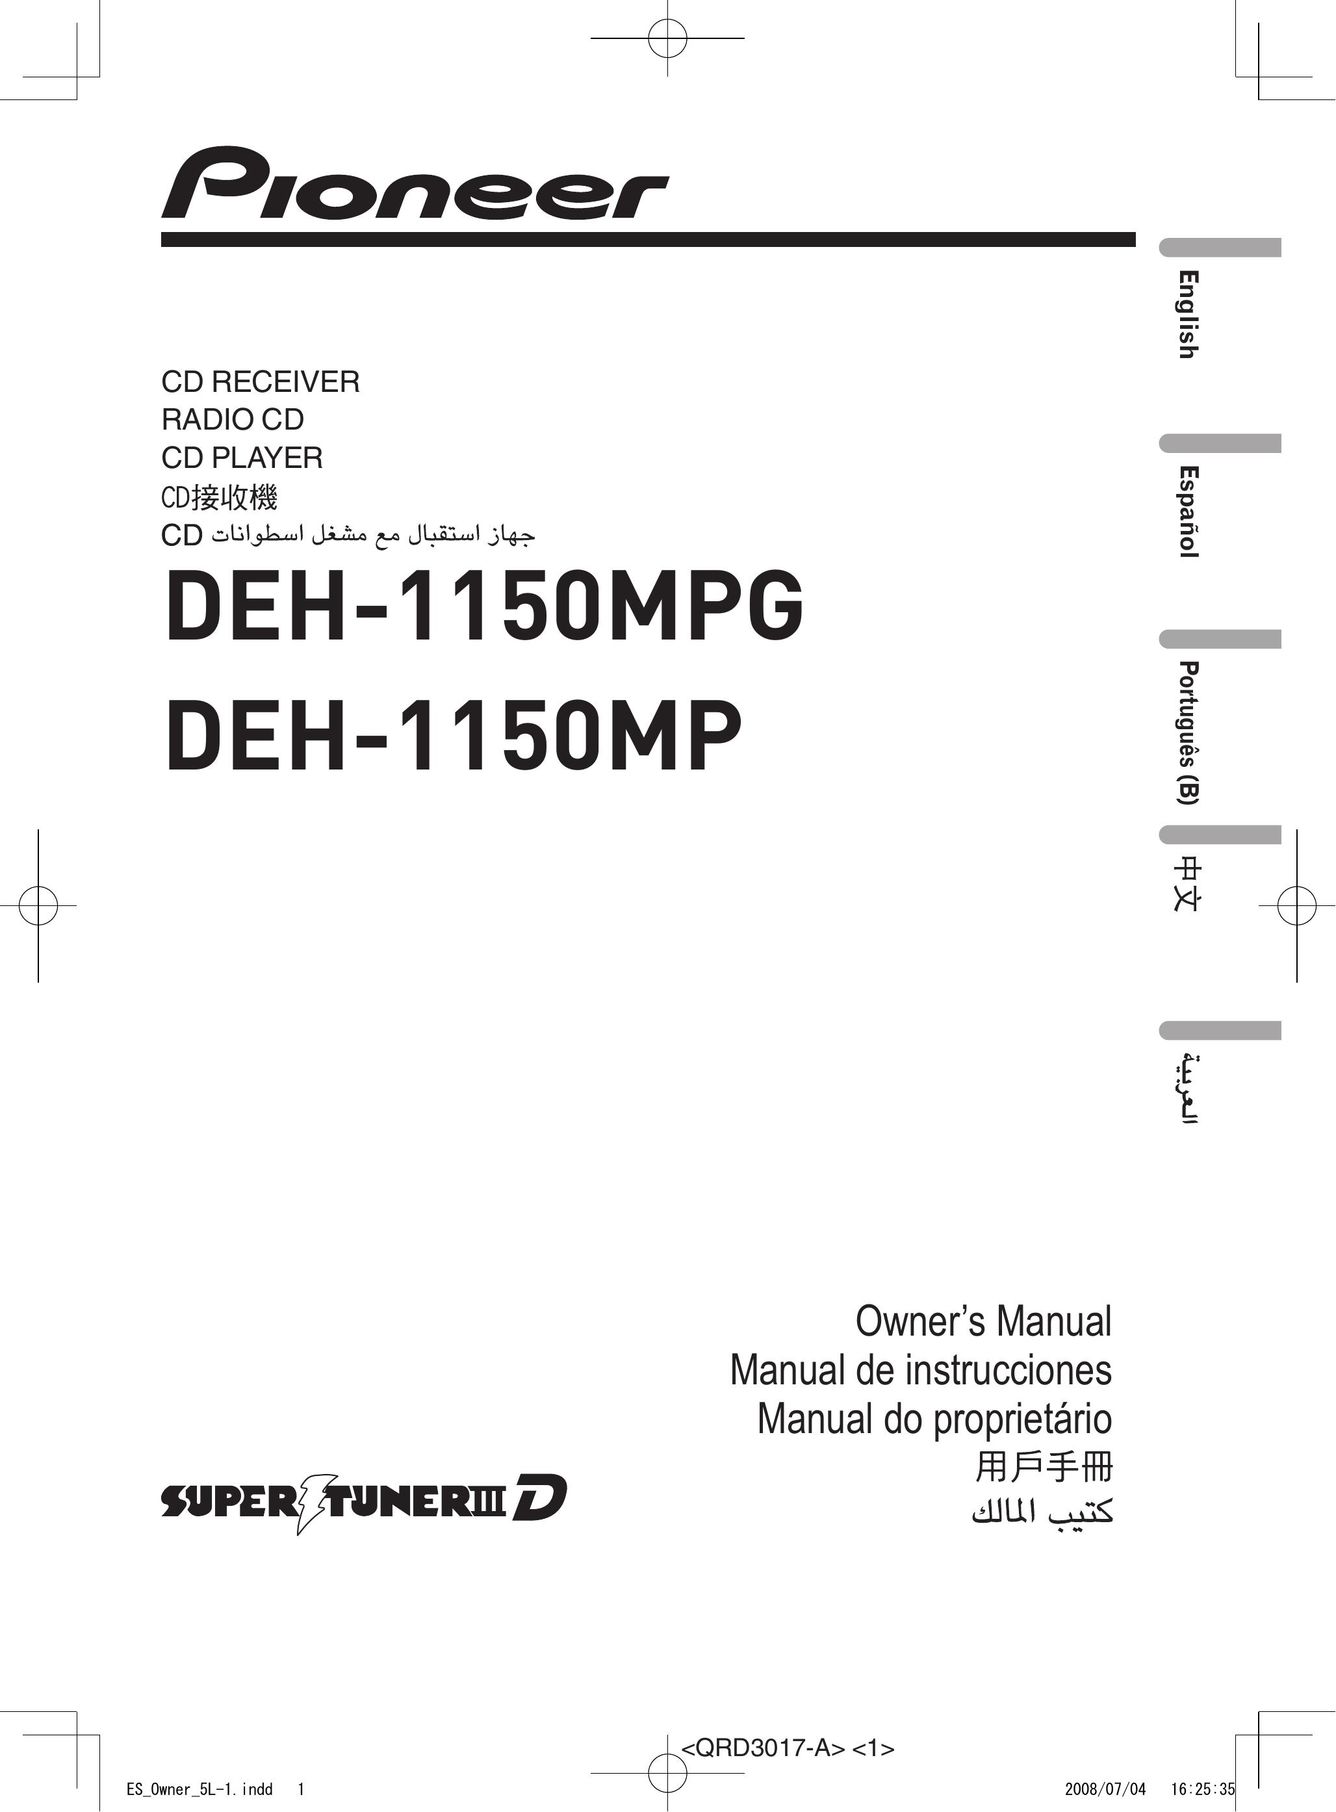 Pioneer DEH-1150MP Car Stereo System User Manual